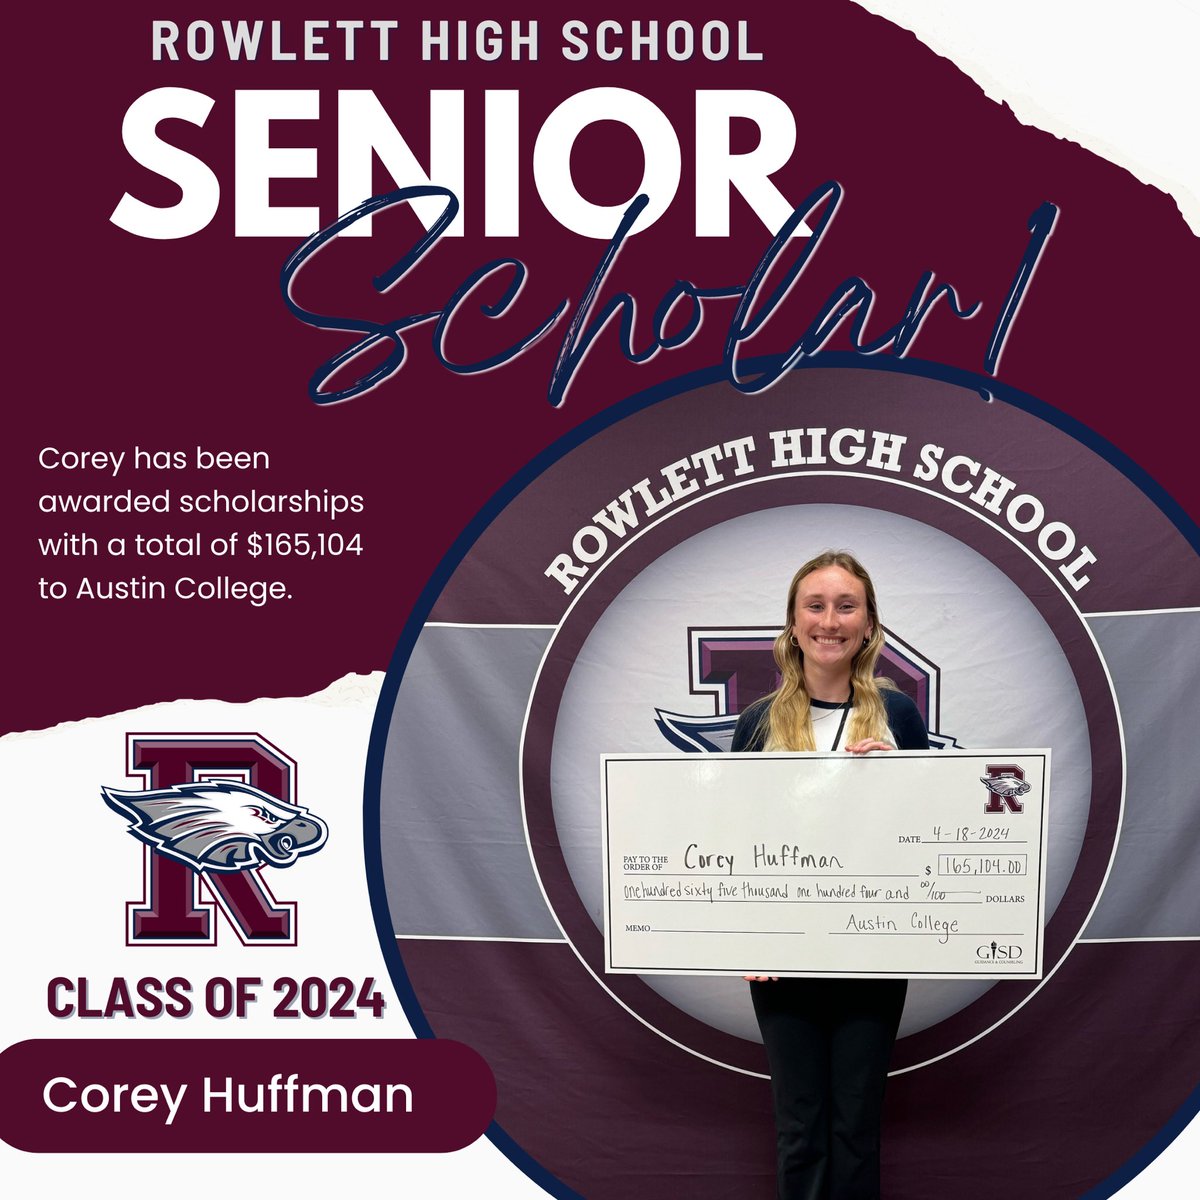 RHS Senior Scholar | Corey Huffman | $165,104 in total scholarships. She will be playing soccer at Austin College. Congrats Corey! 🦅 🎓 #WeROne #theGISDeffect #GISDScholarships